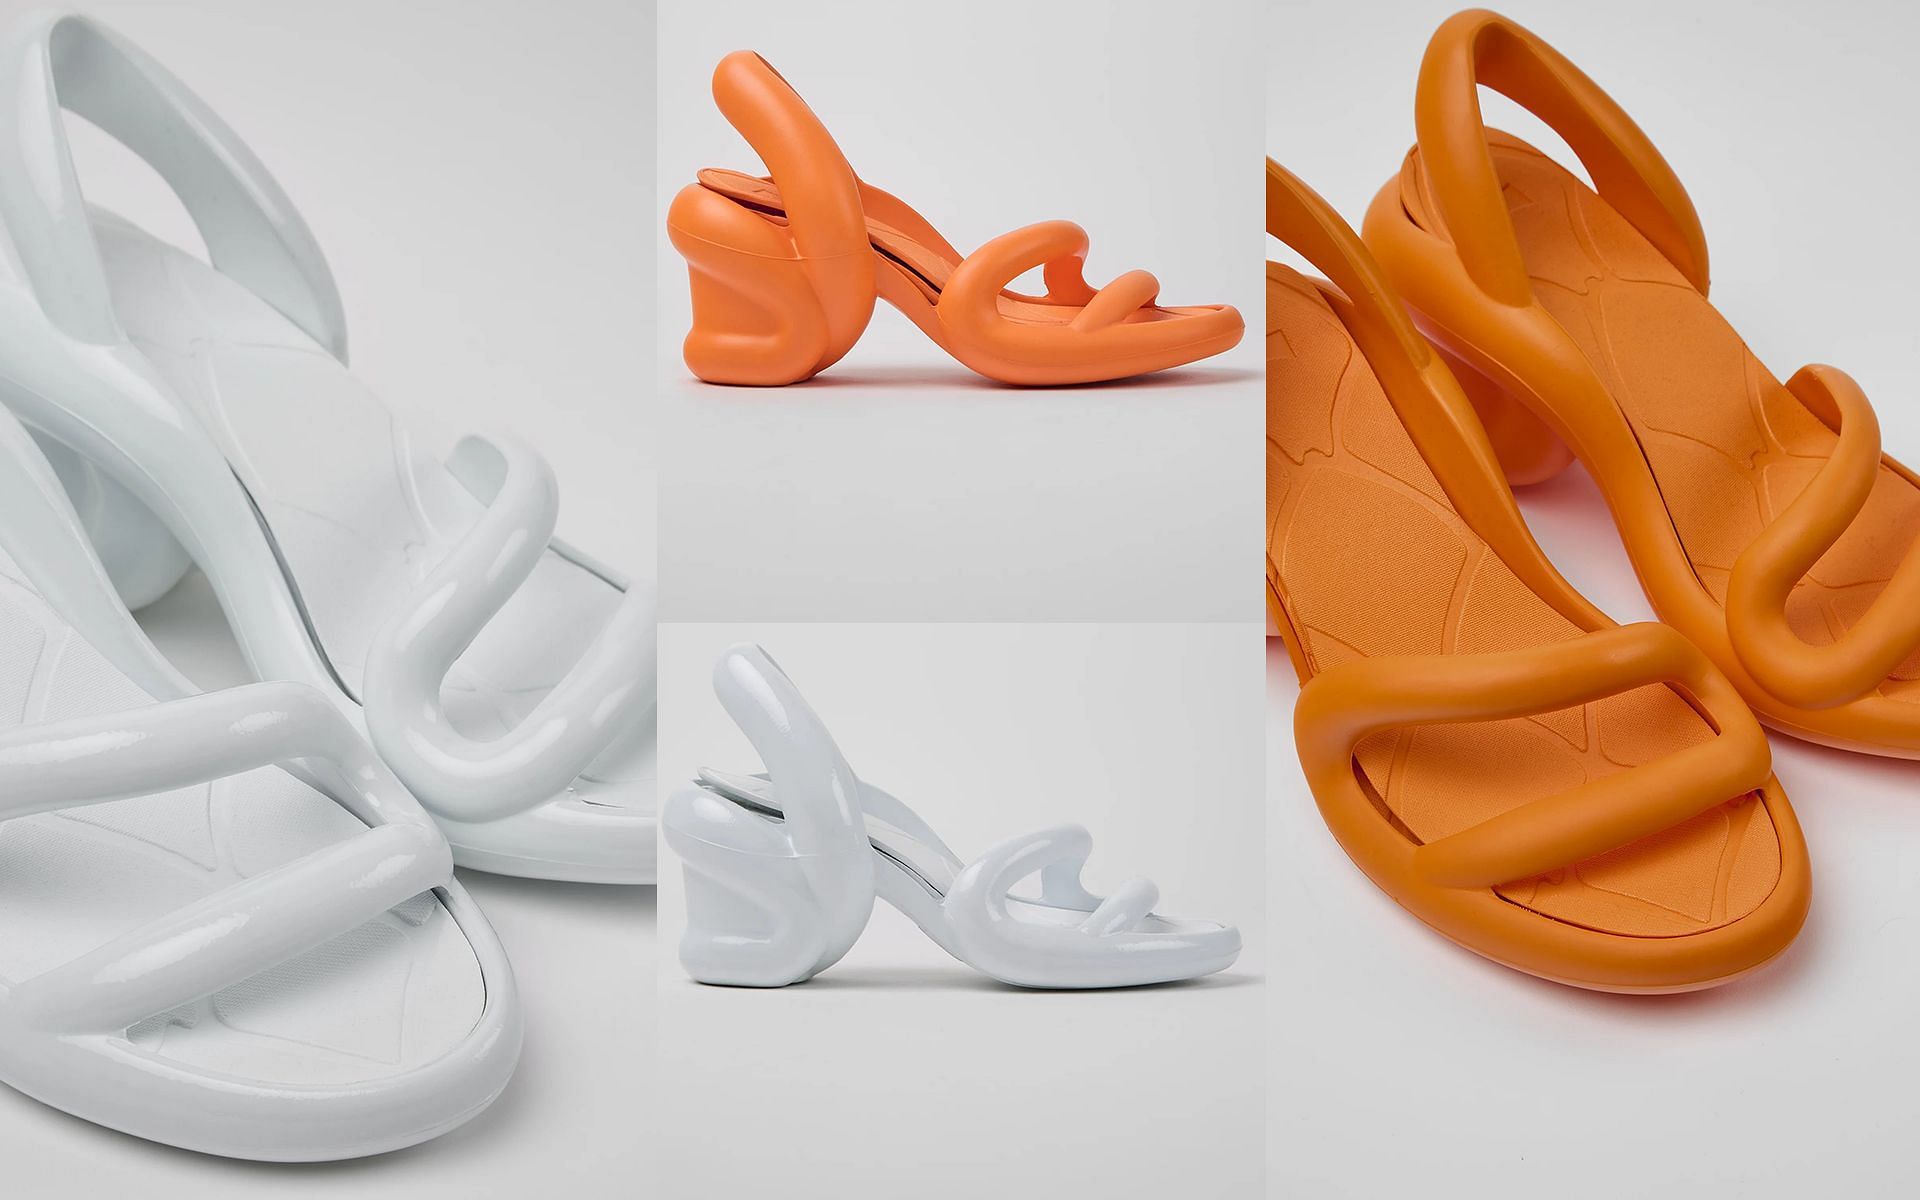 Camper will release its iconic Kobarah sandals in a wider range of sizes (Image via Sportskeeda)